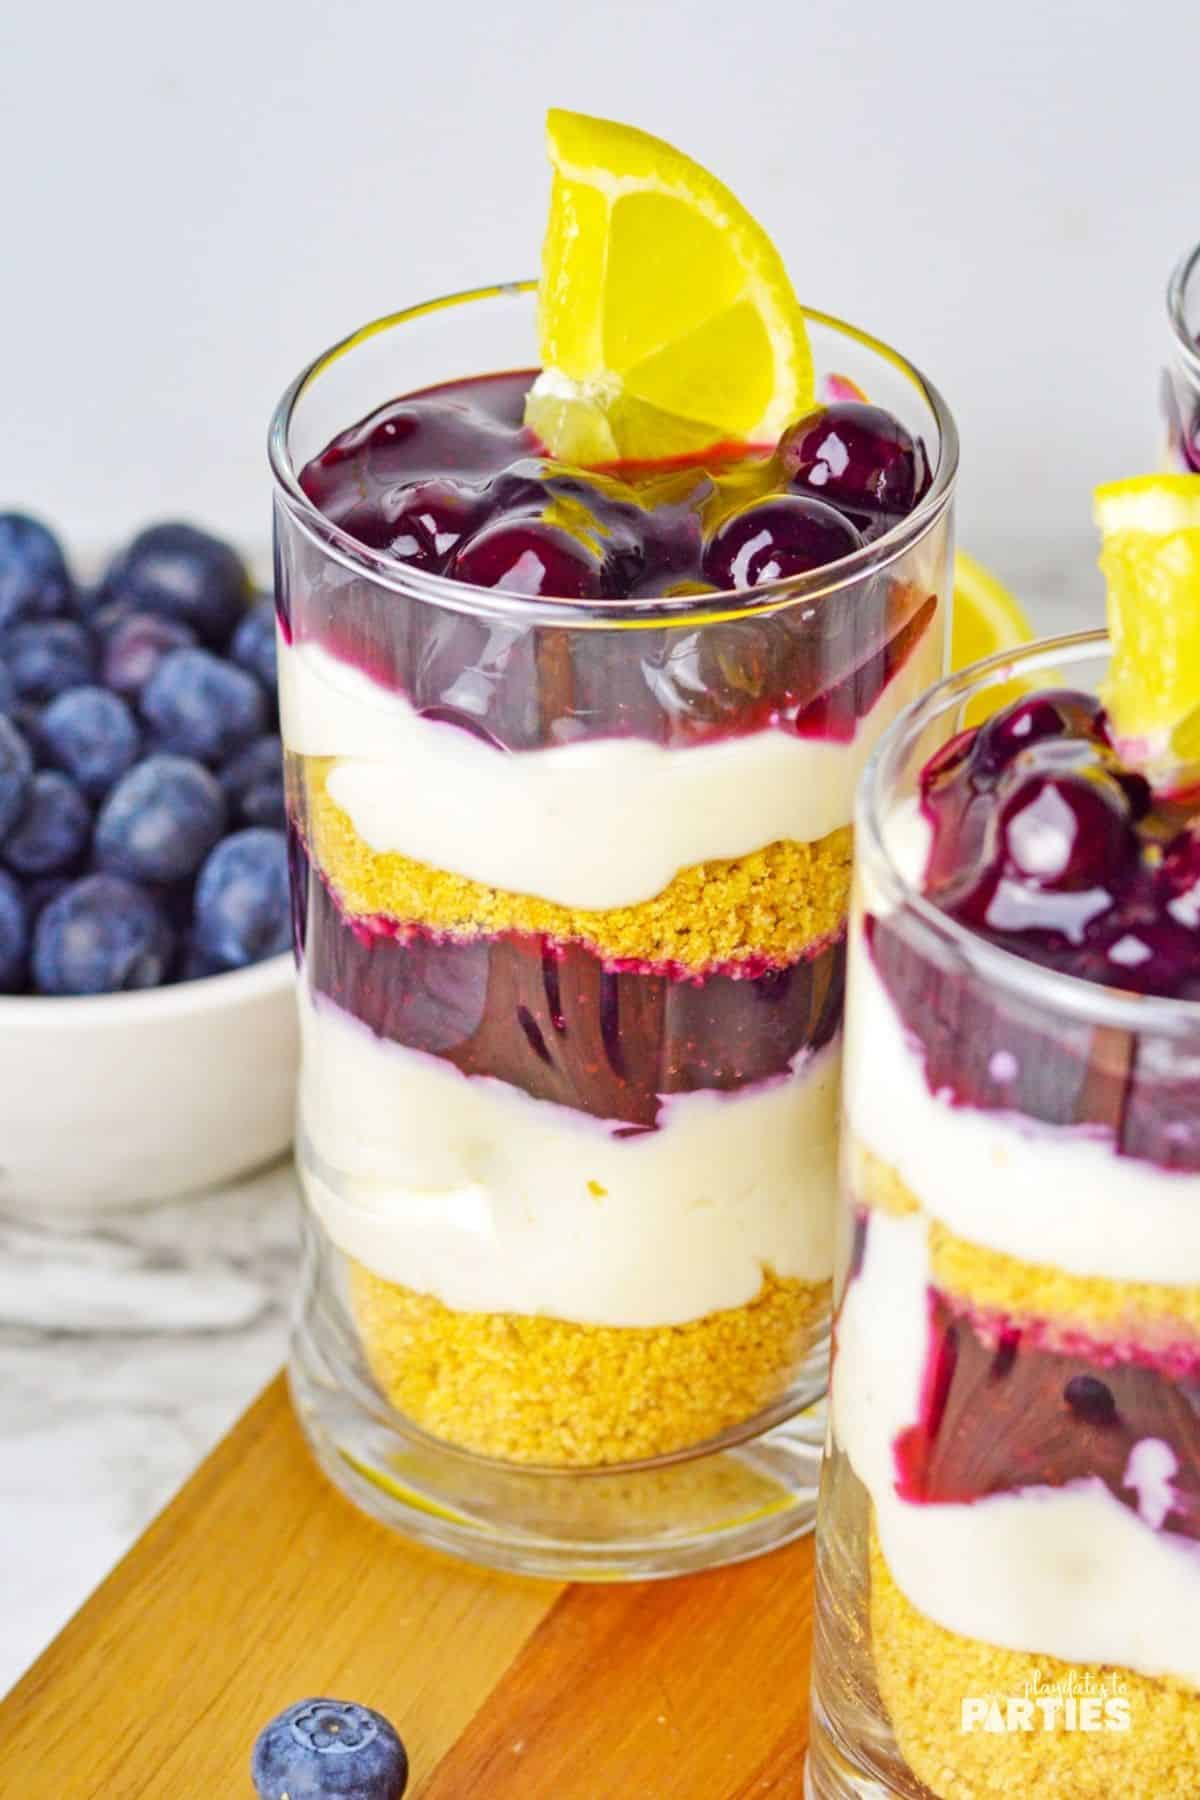 A single serve parfait with blueberry compote and yogurt.